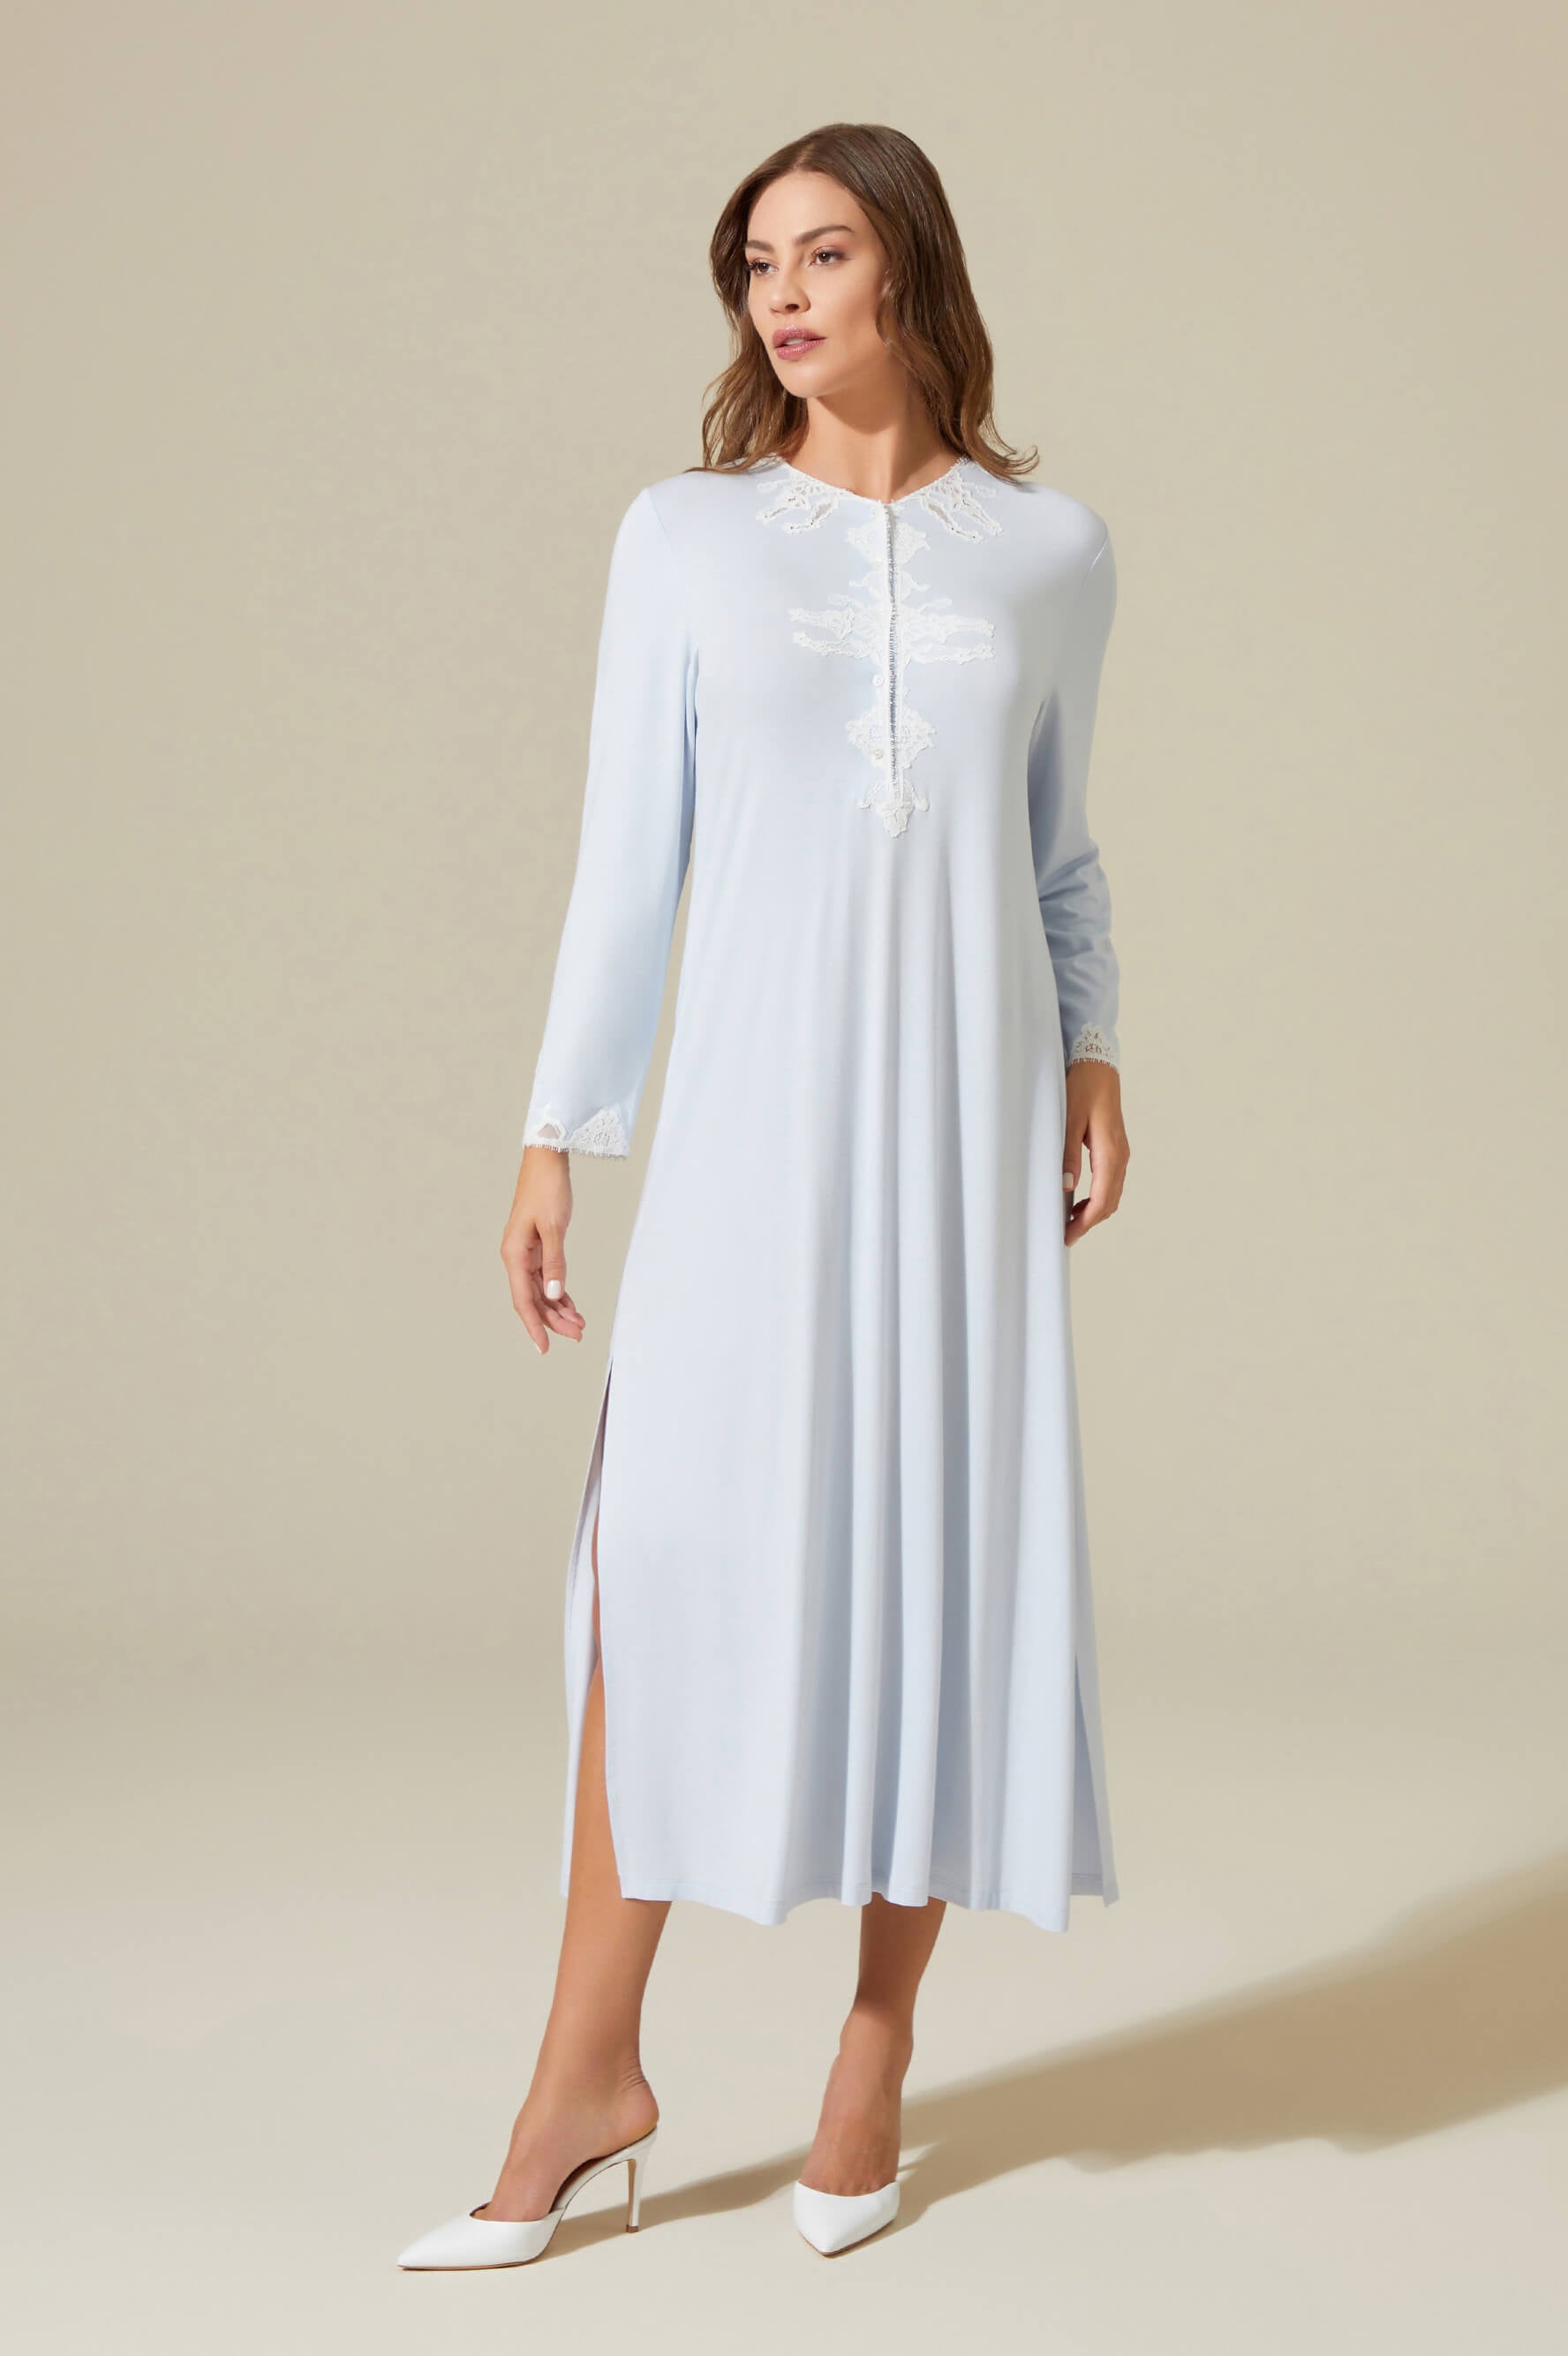 Tiffany Long Velvet Zippered Robe Set with Matching Combed Cotton Inner Nightgown - Off White on Baby Blue